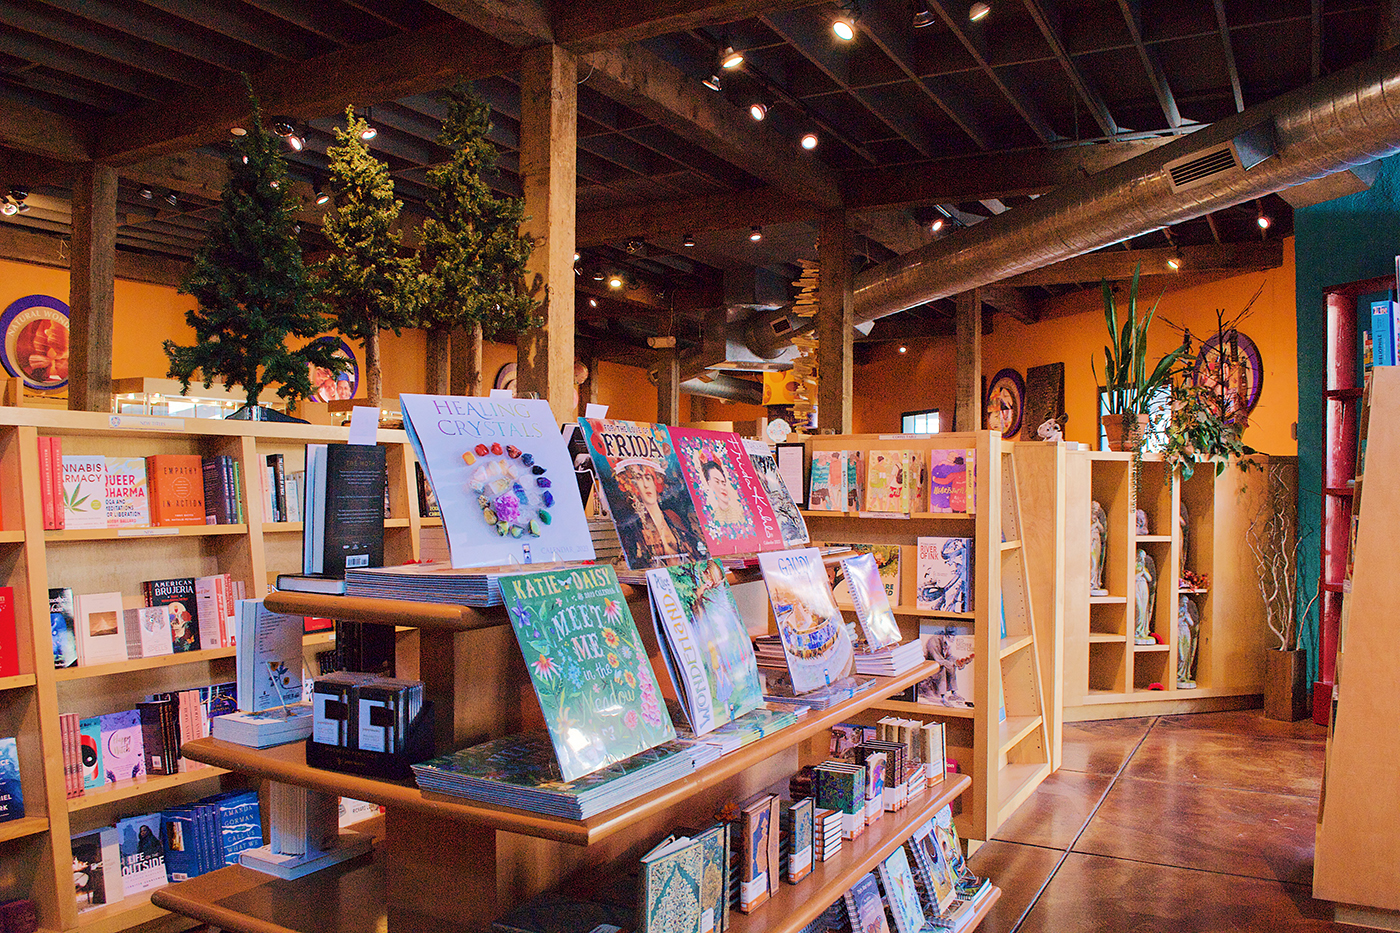 Golden Braid Books provides spiritual enrichment and education through their products and in-person events.